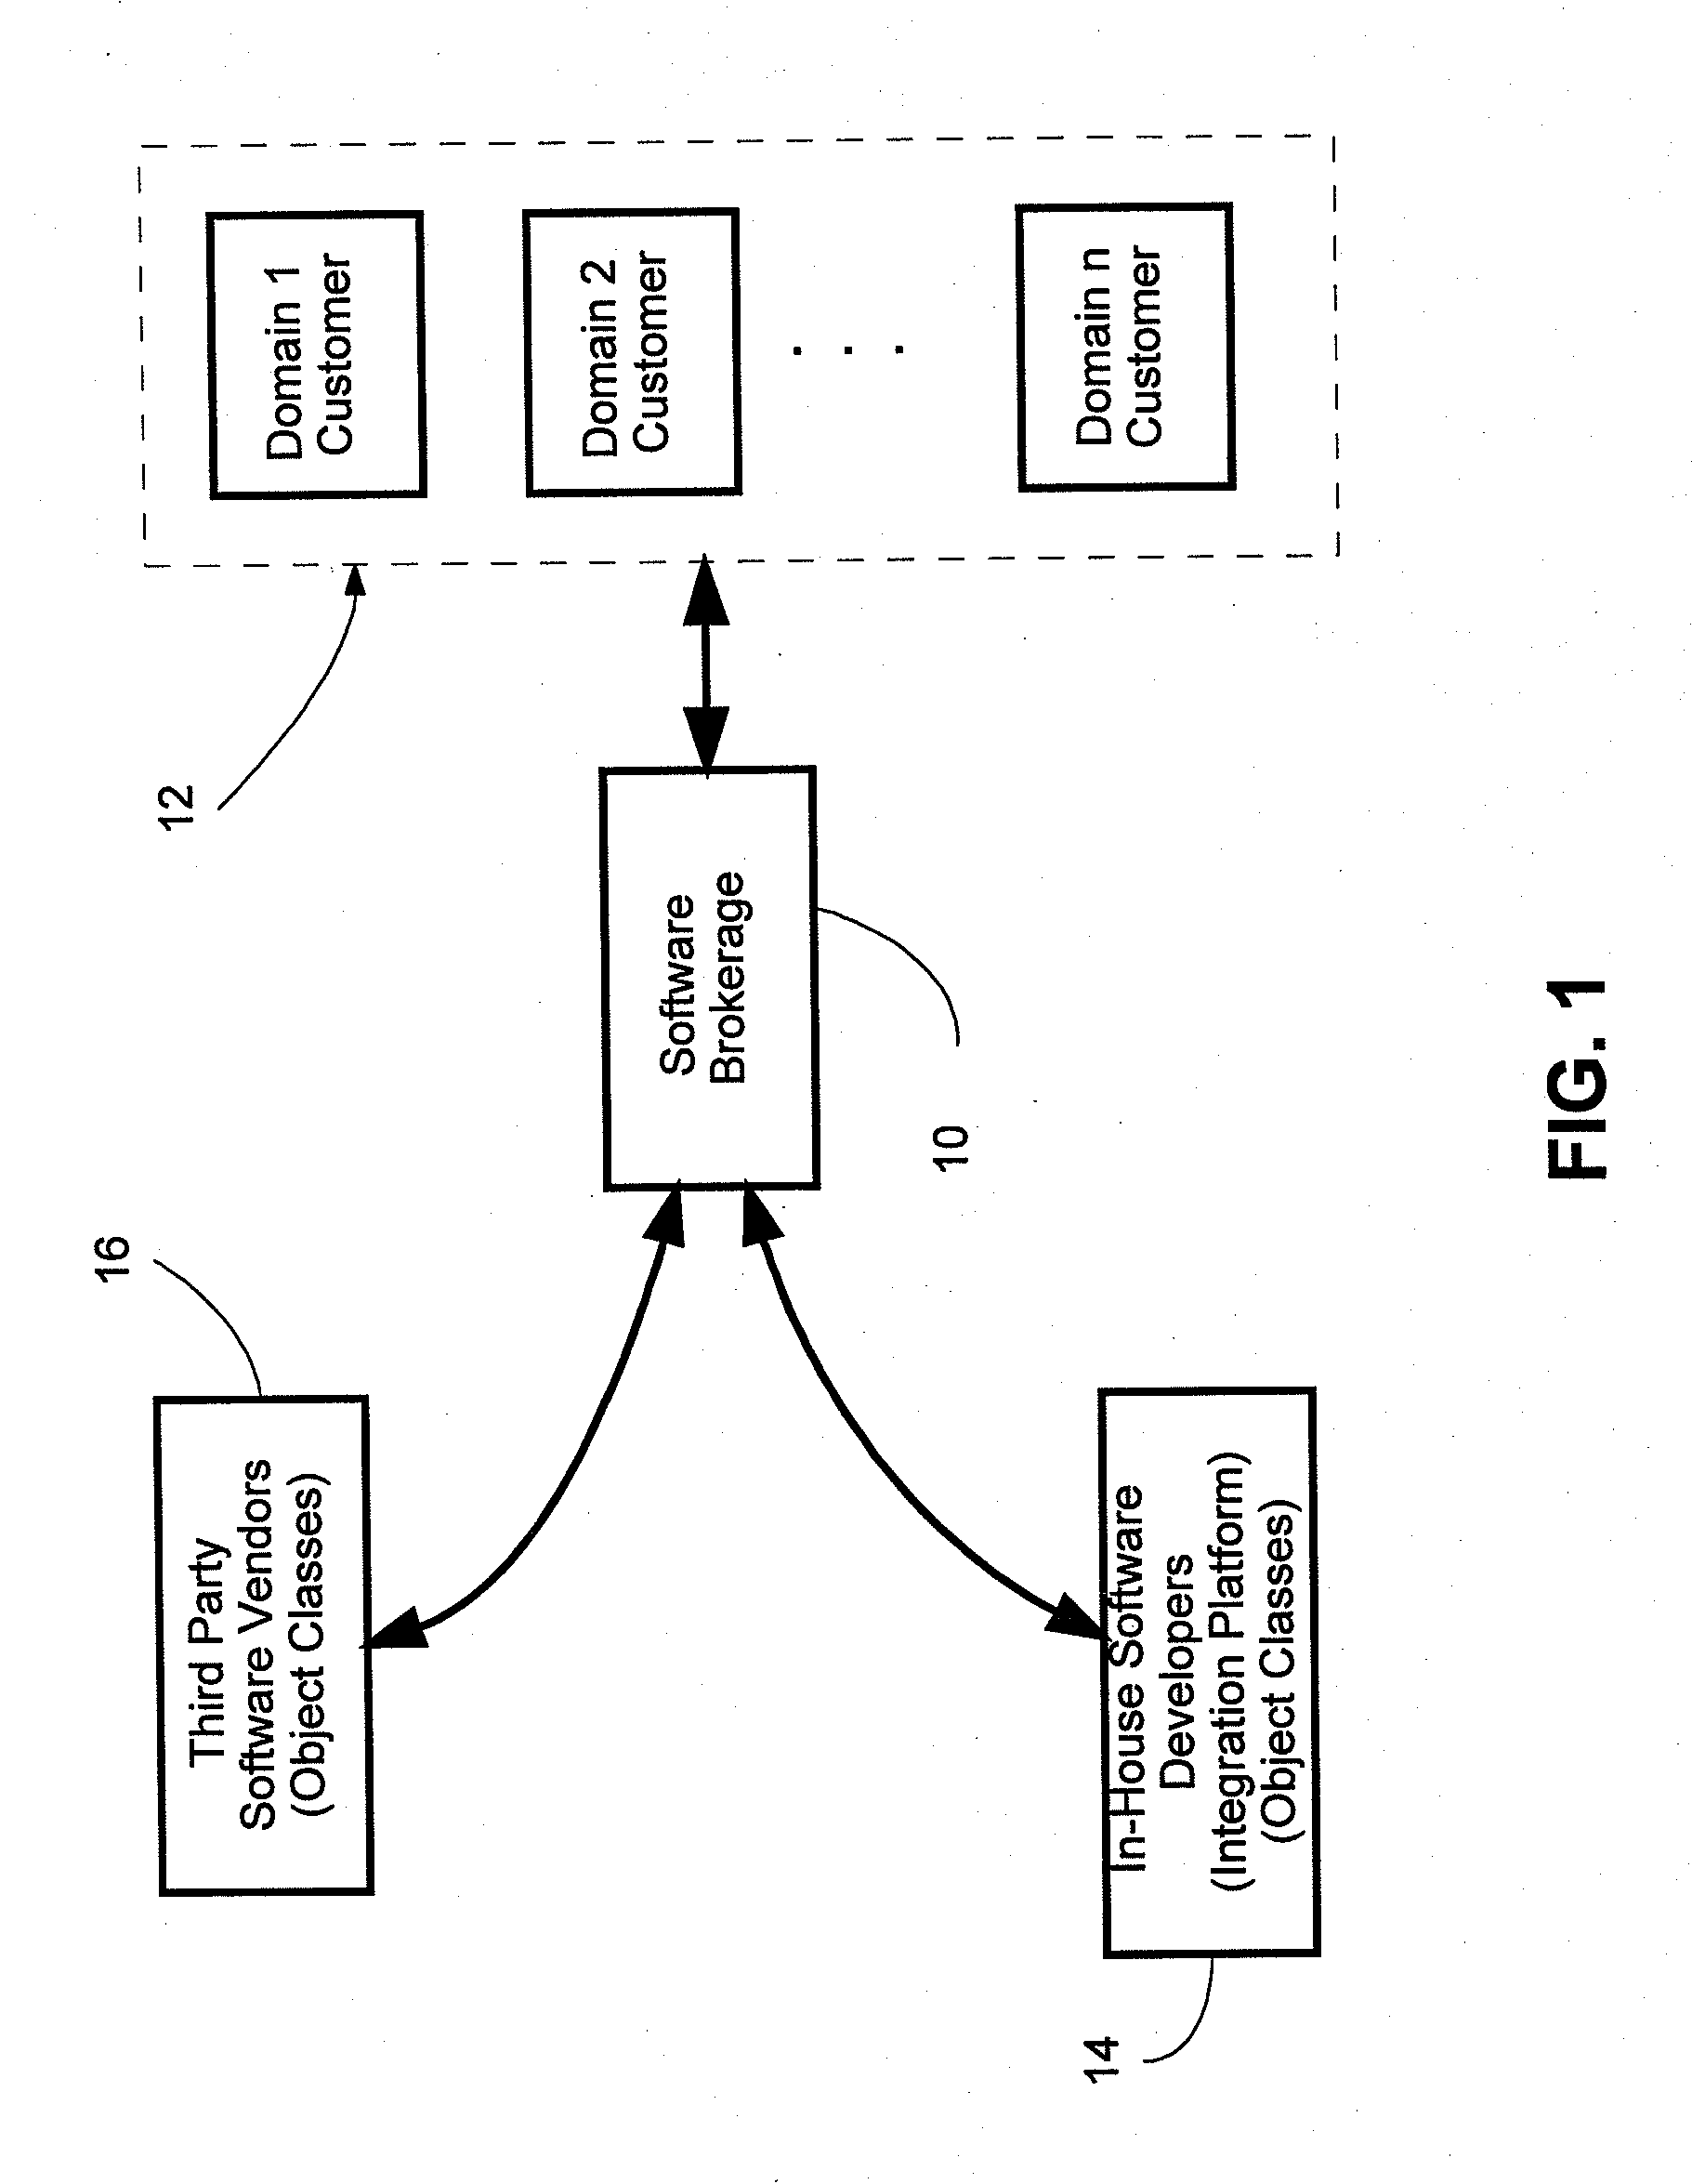 Distributing and billing software according to customer use of program modules